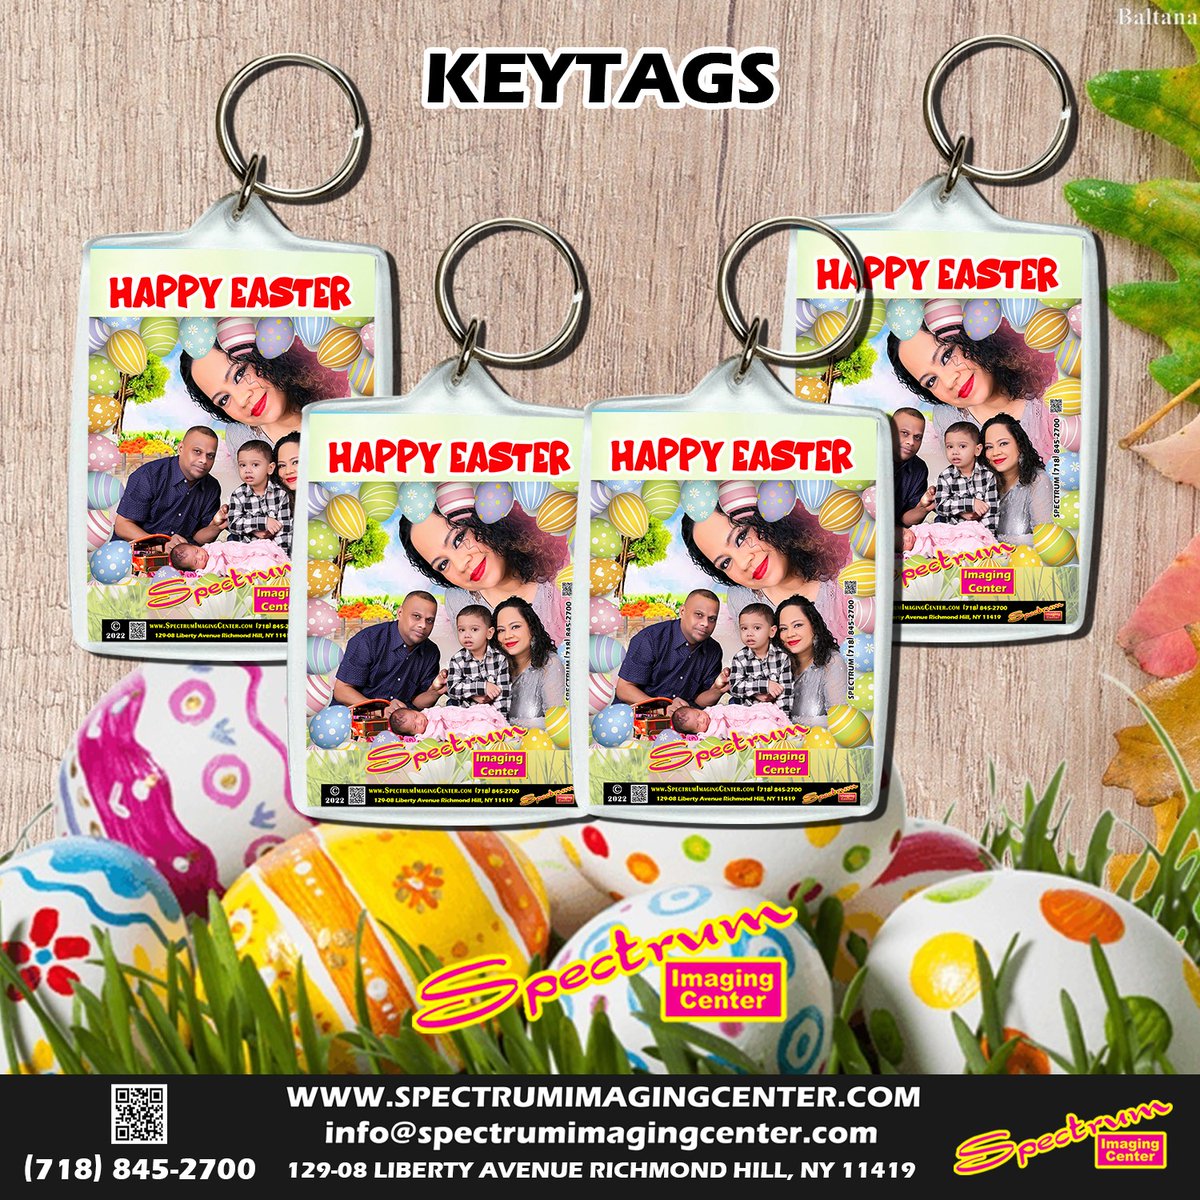 Custom Design Your Keychains today!!- Easter 2023.
Key tags set of 4 for just $20.00.
#easterkeytags #keytags2023 #style #fashion #giftitems 
#spc #keychainsforsale #keyrings 
#Spectrum_Imaging_Center
Since 1973
129-08 Liberty Ave
Richmond Hill, NY 11419
Phone# 718-845-2700